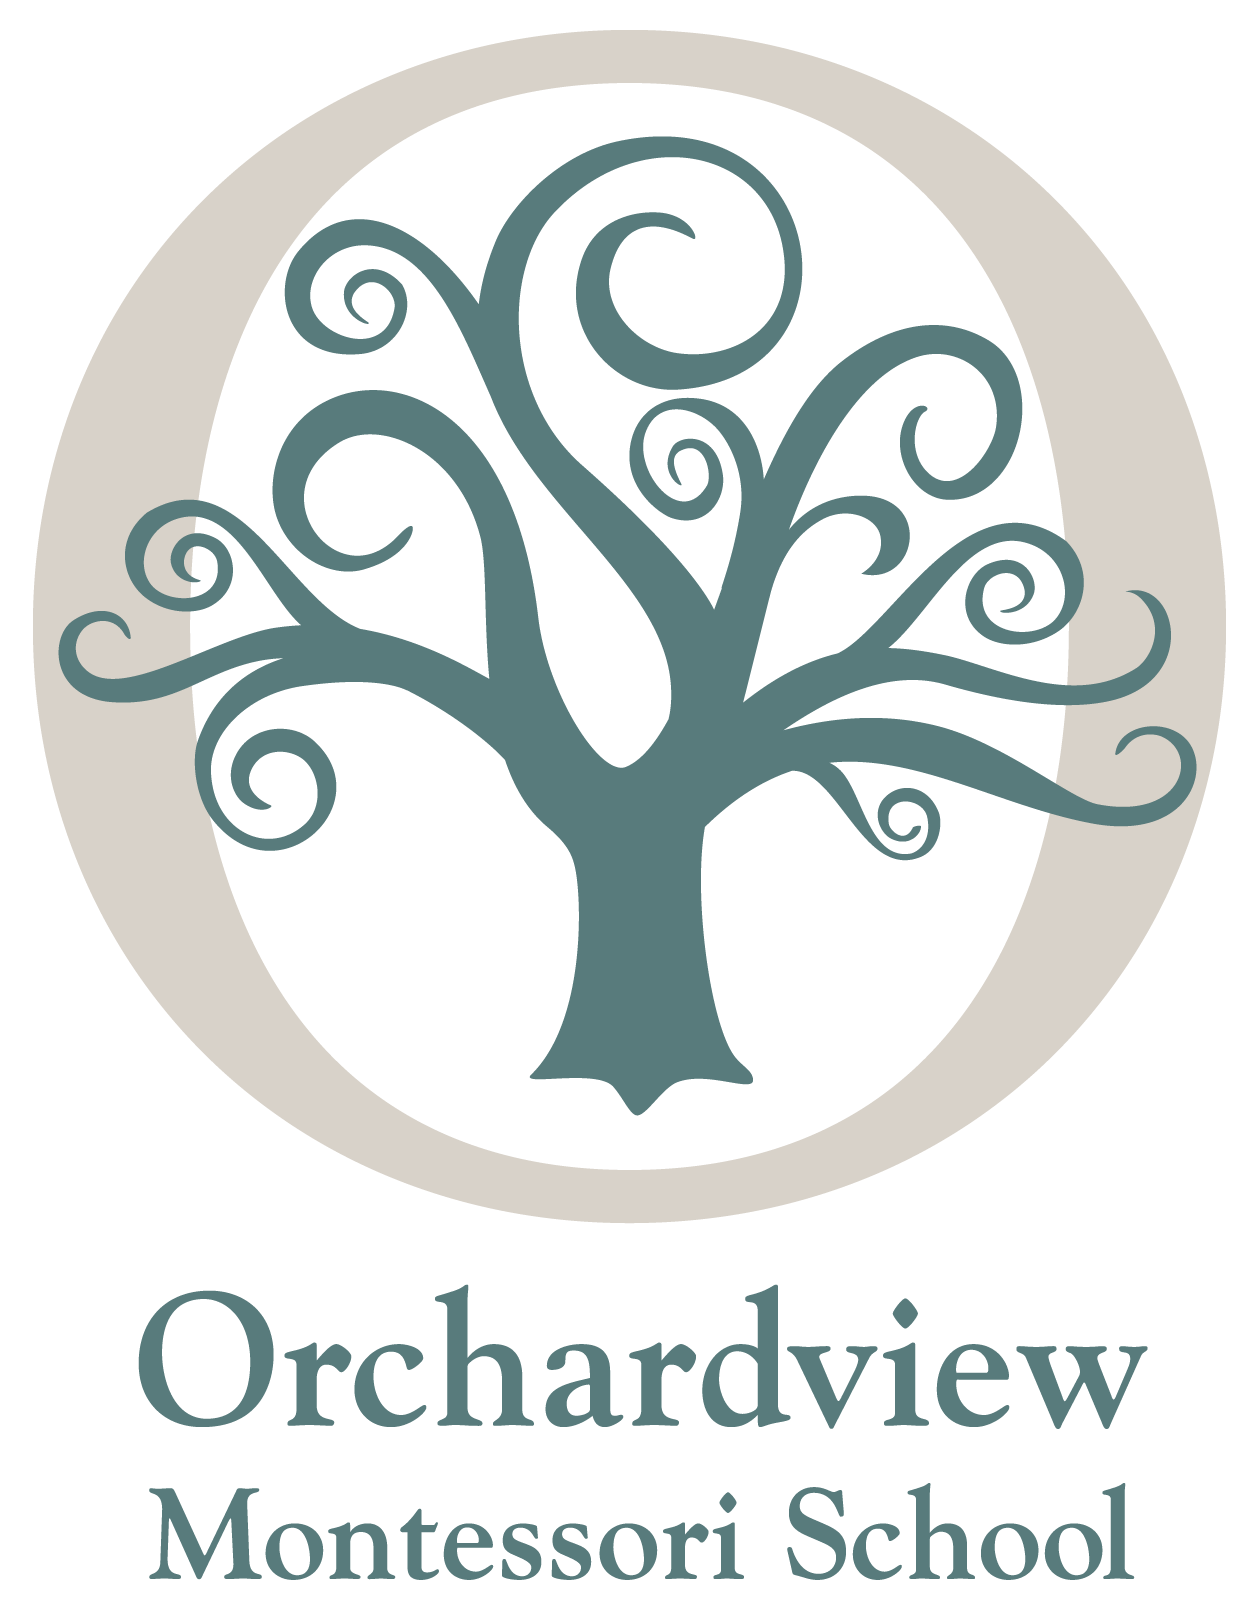 Orchardview Montessori – Official Site